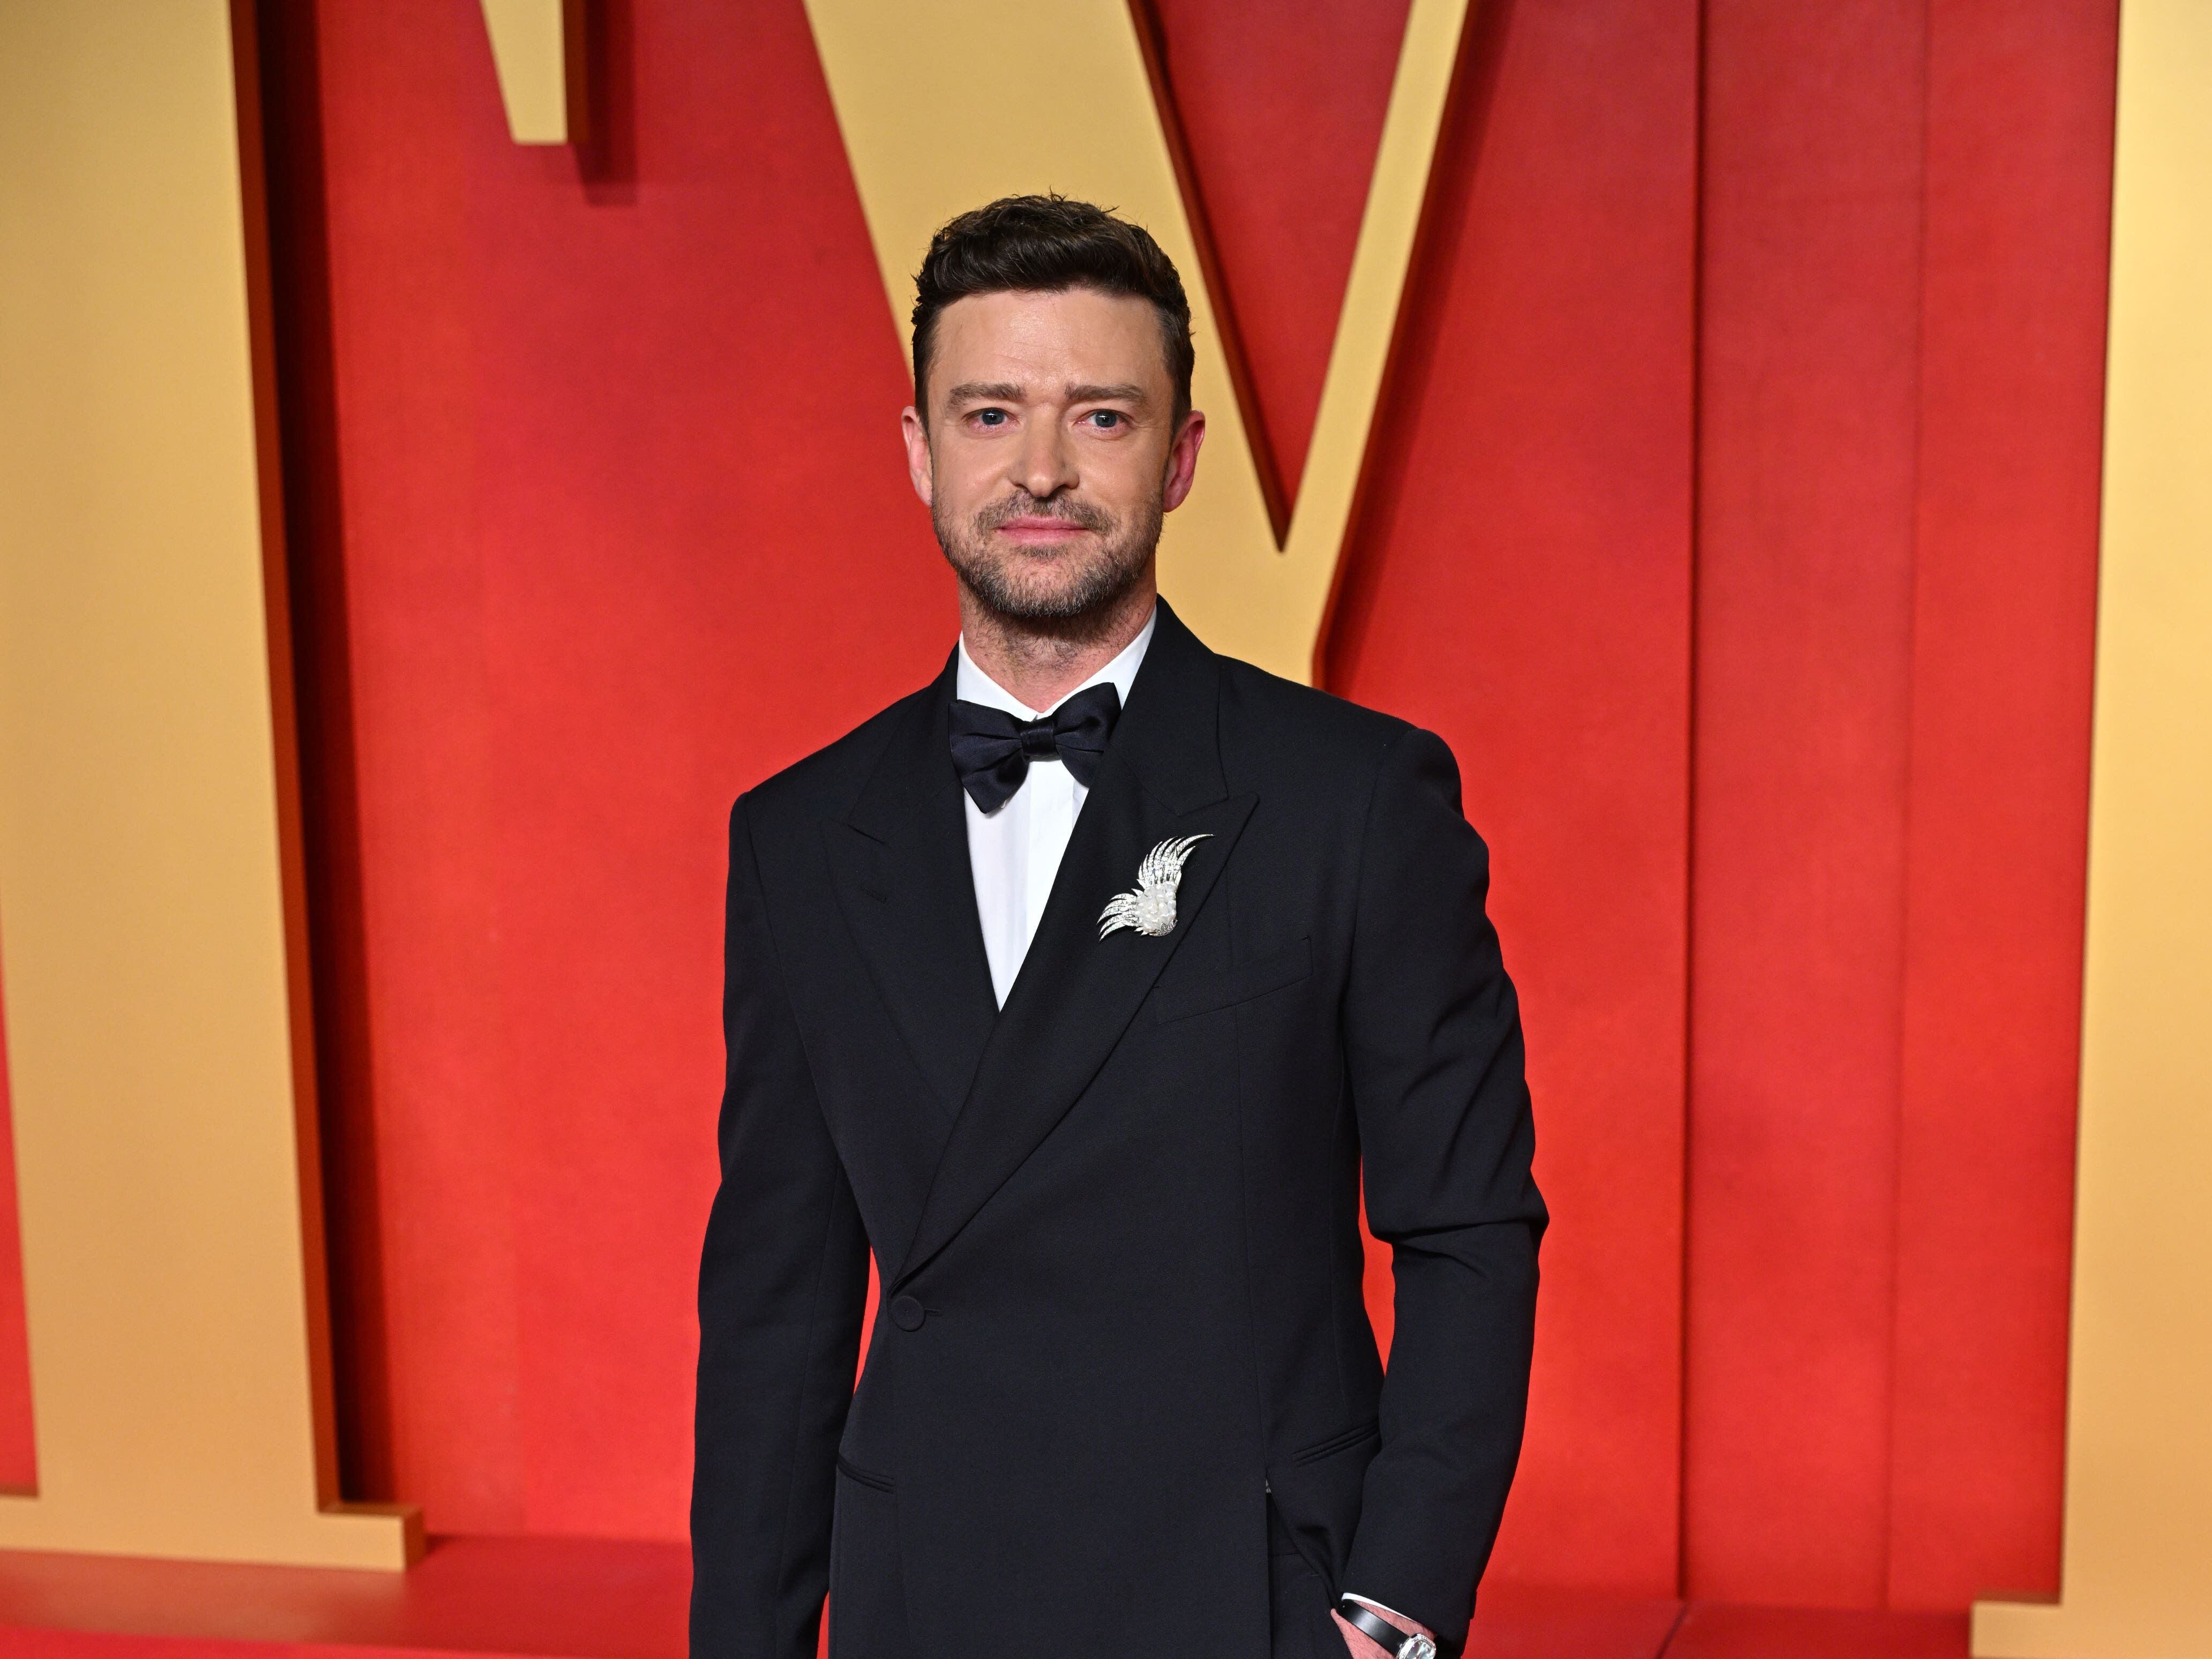 Justin Timberlake arrested for ‘driving while intoxicated’ in US, police say